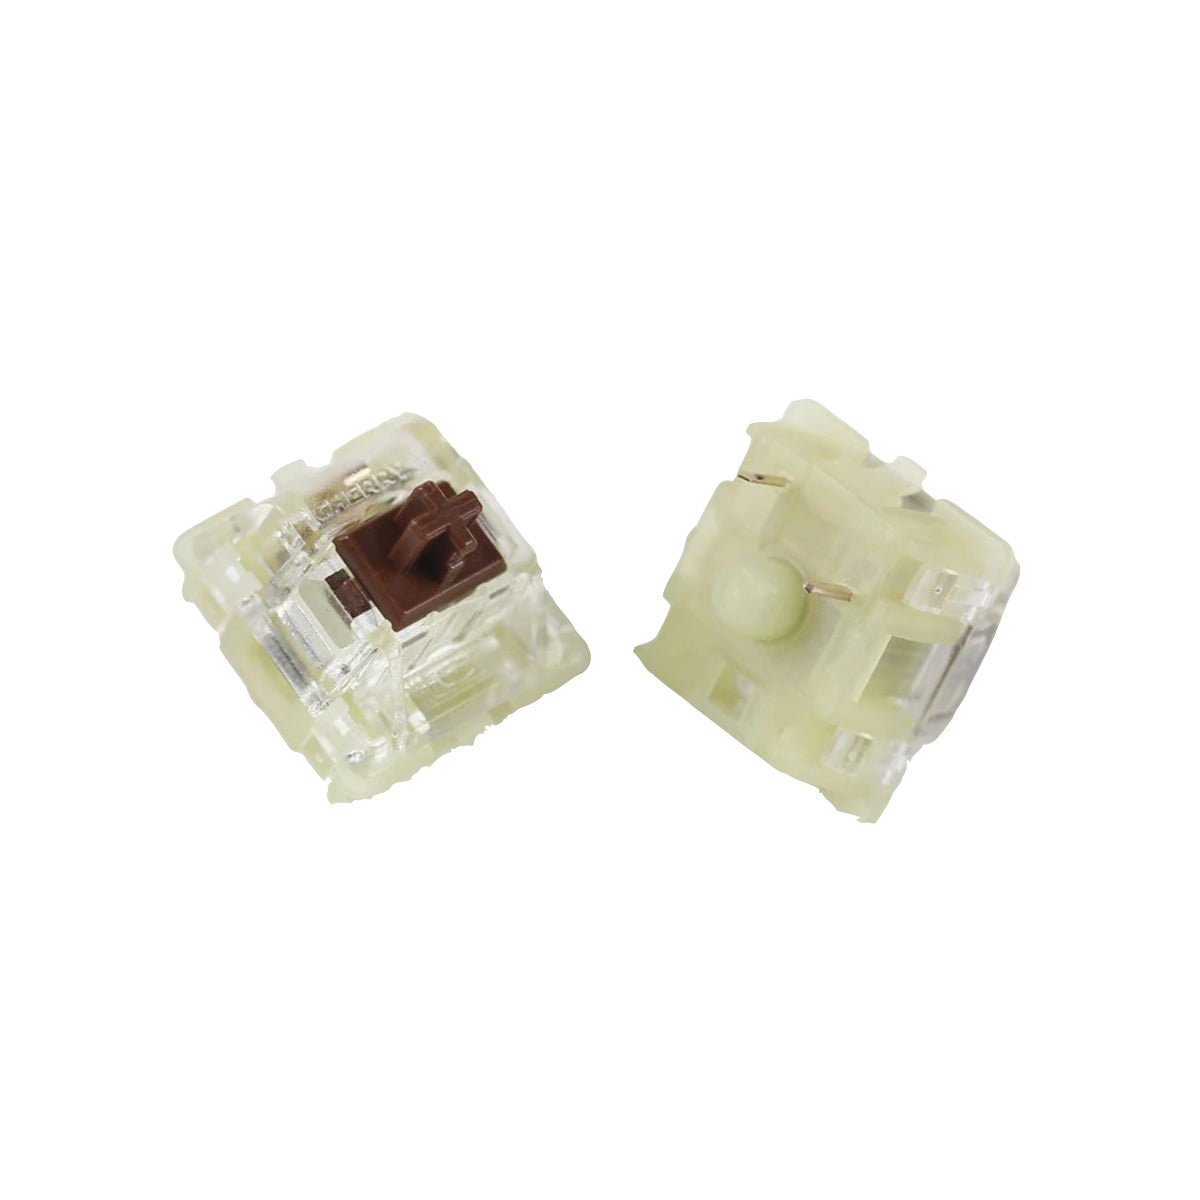 KBD Fans Cherry RGB Switches - Brown - Store 974 | ستور ٩٧٤